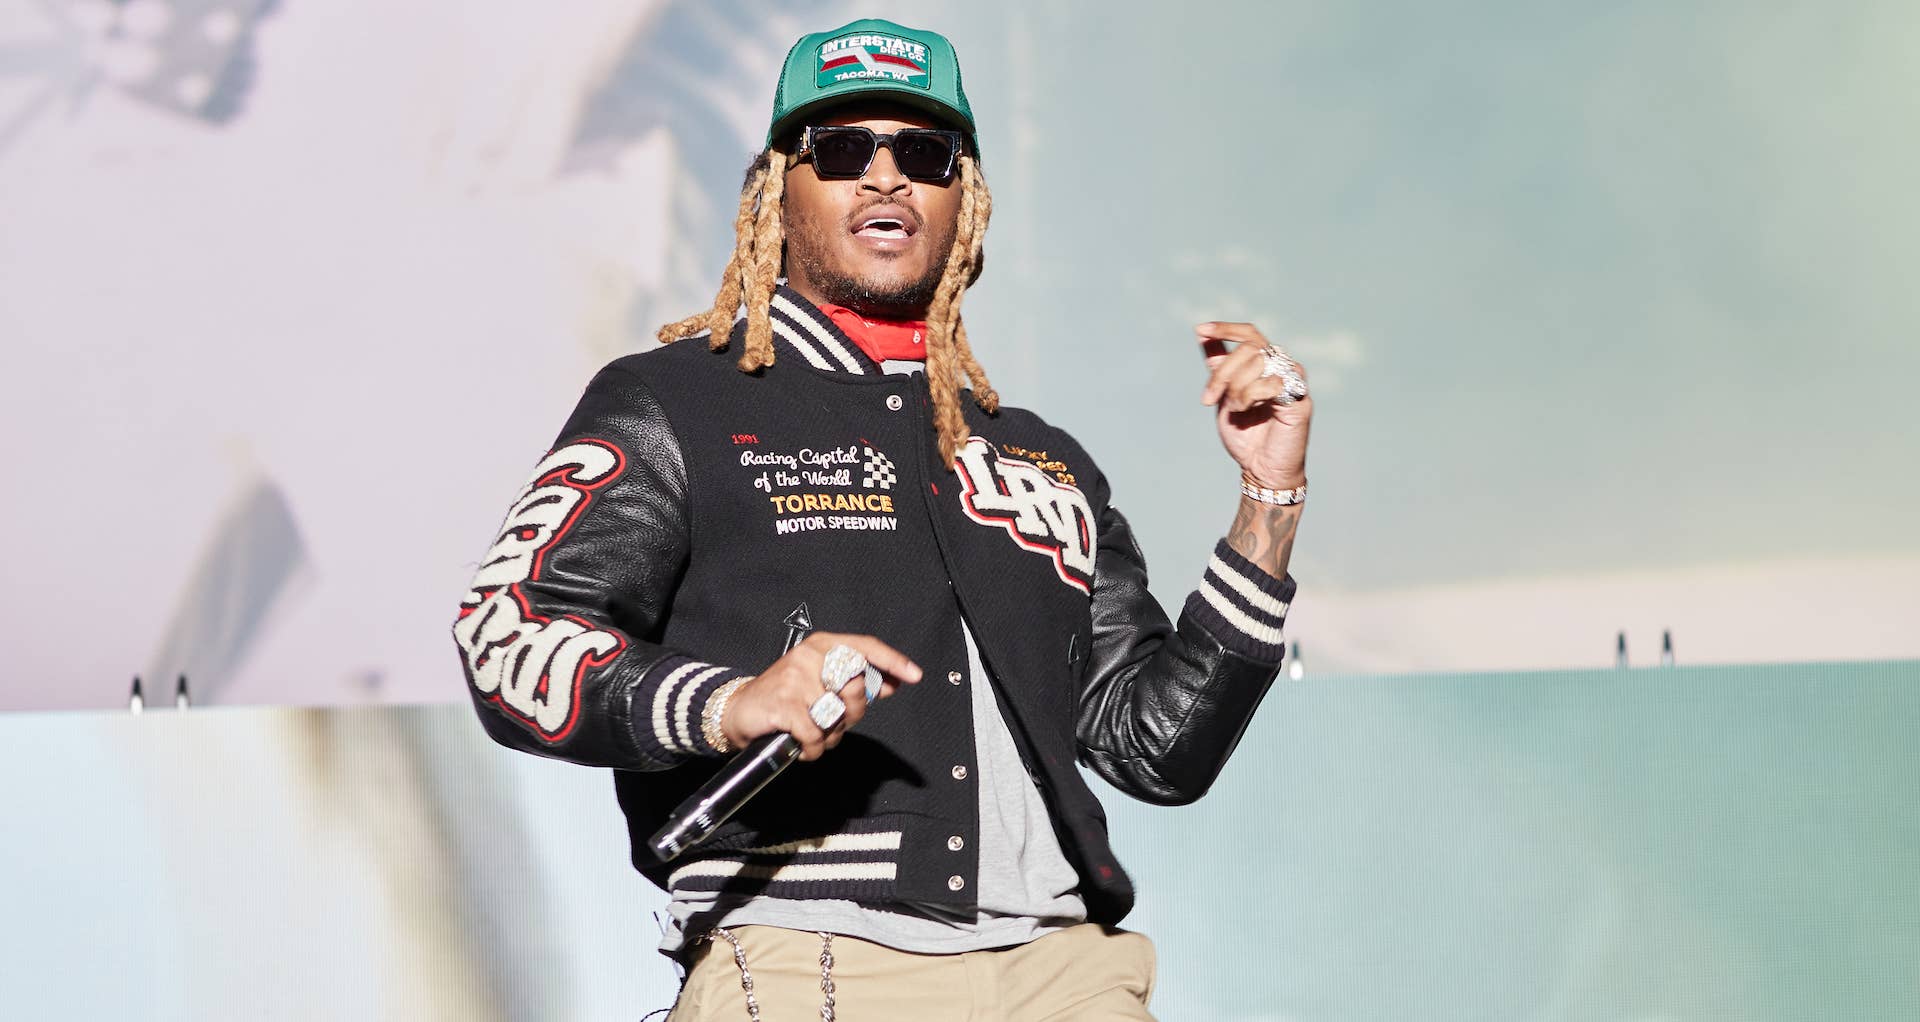 Future performs at 2021 Wireless Festival